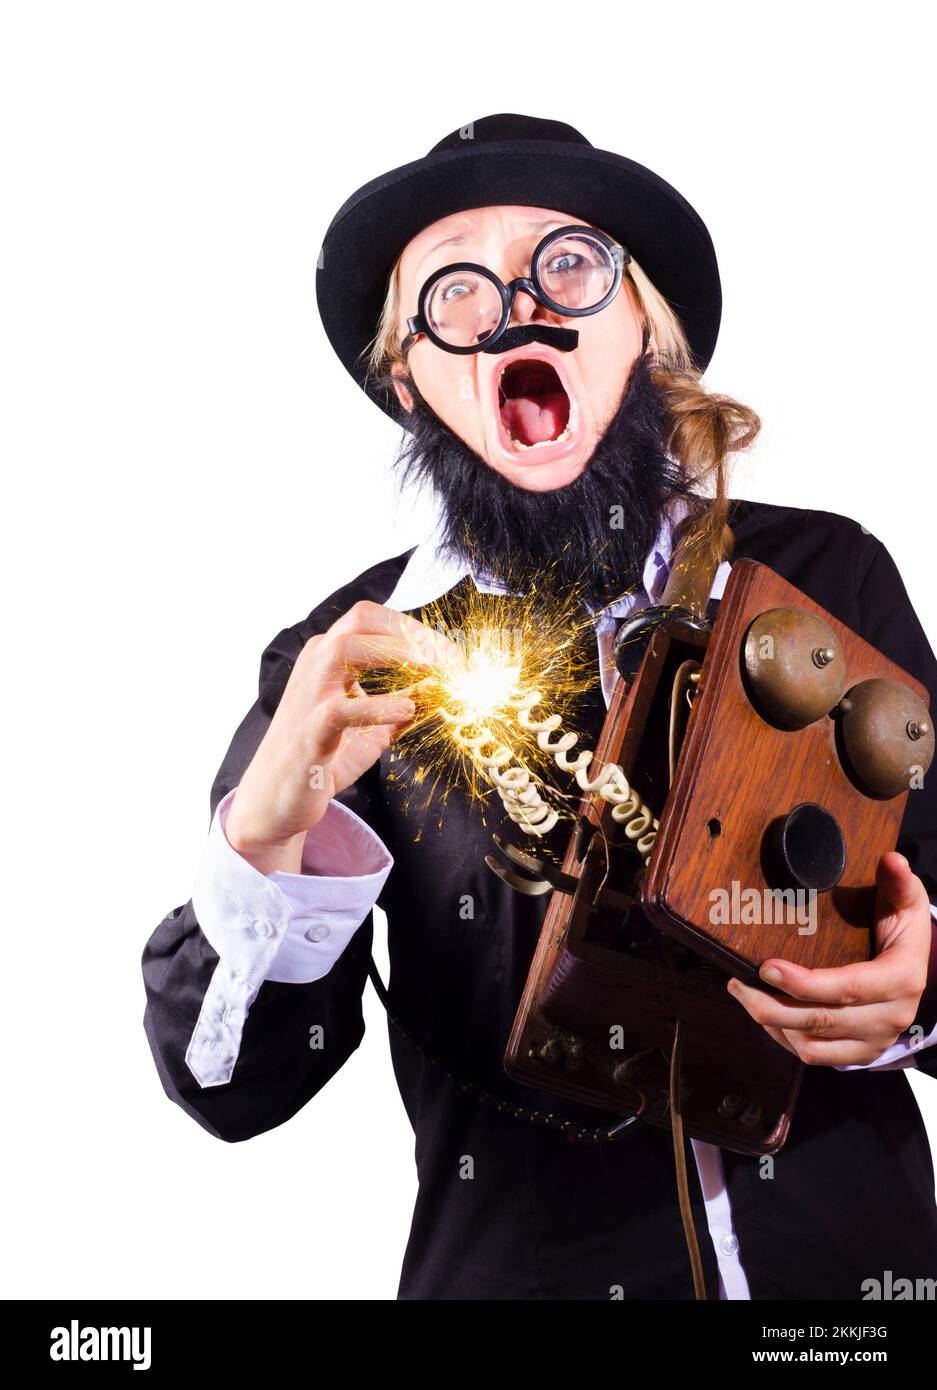 Strange looking woman in black hat, false beard and jacket holding antique telephone and receiving violent electric shock Stock Photo